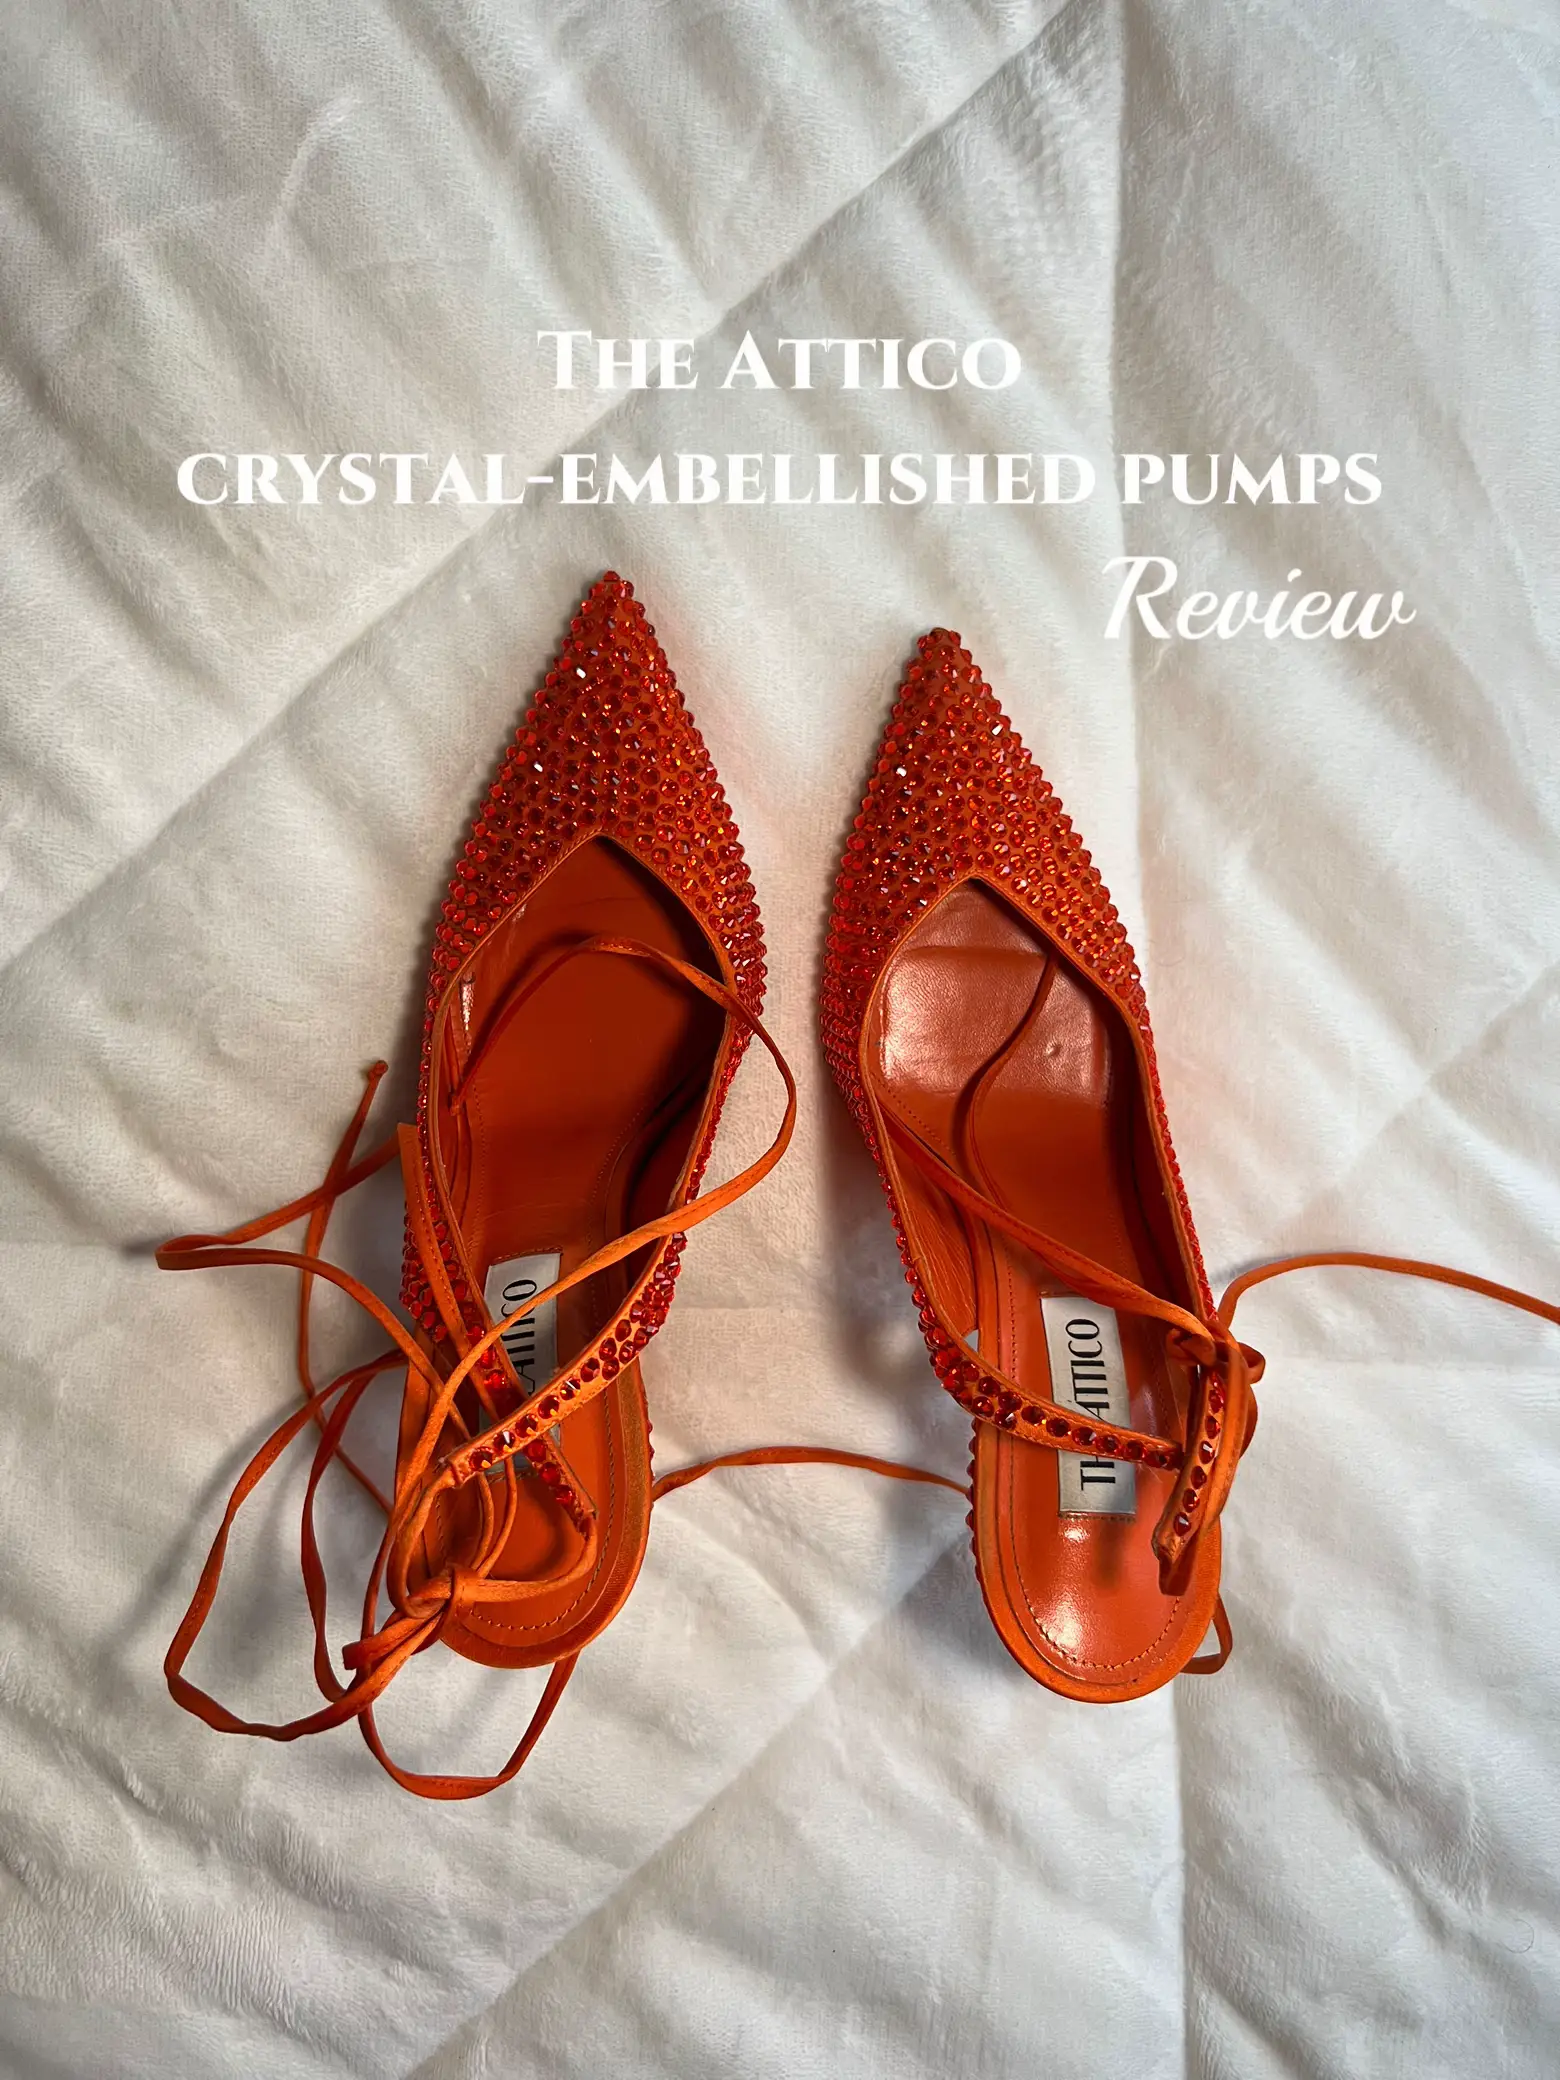 How The Attico Became The Ultimate It-Girl Brand – CR Fashion Book